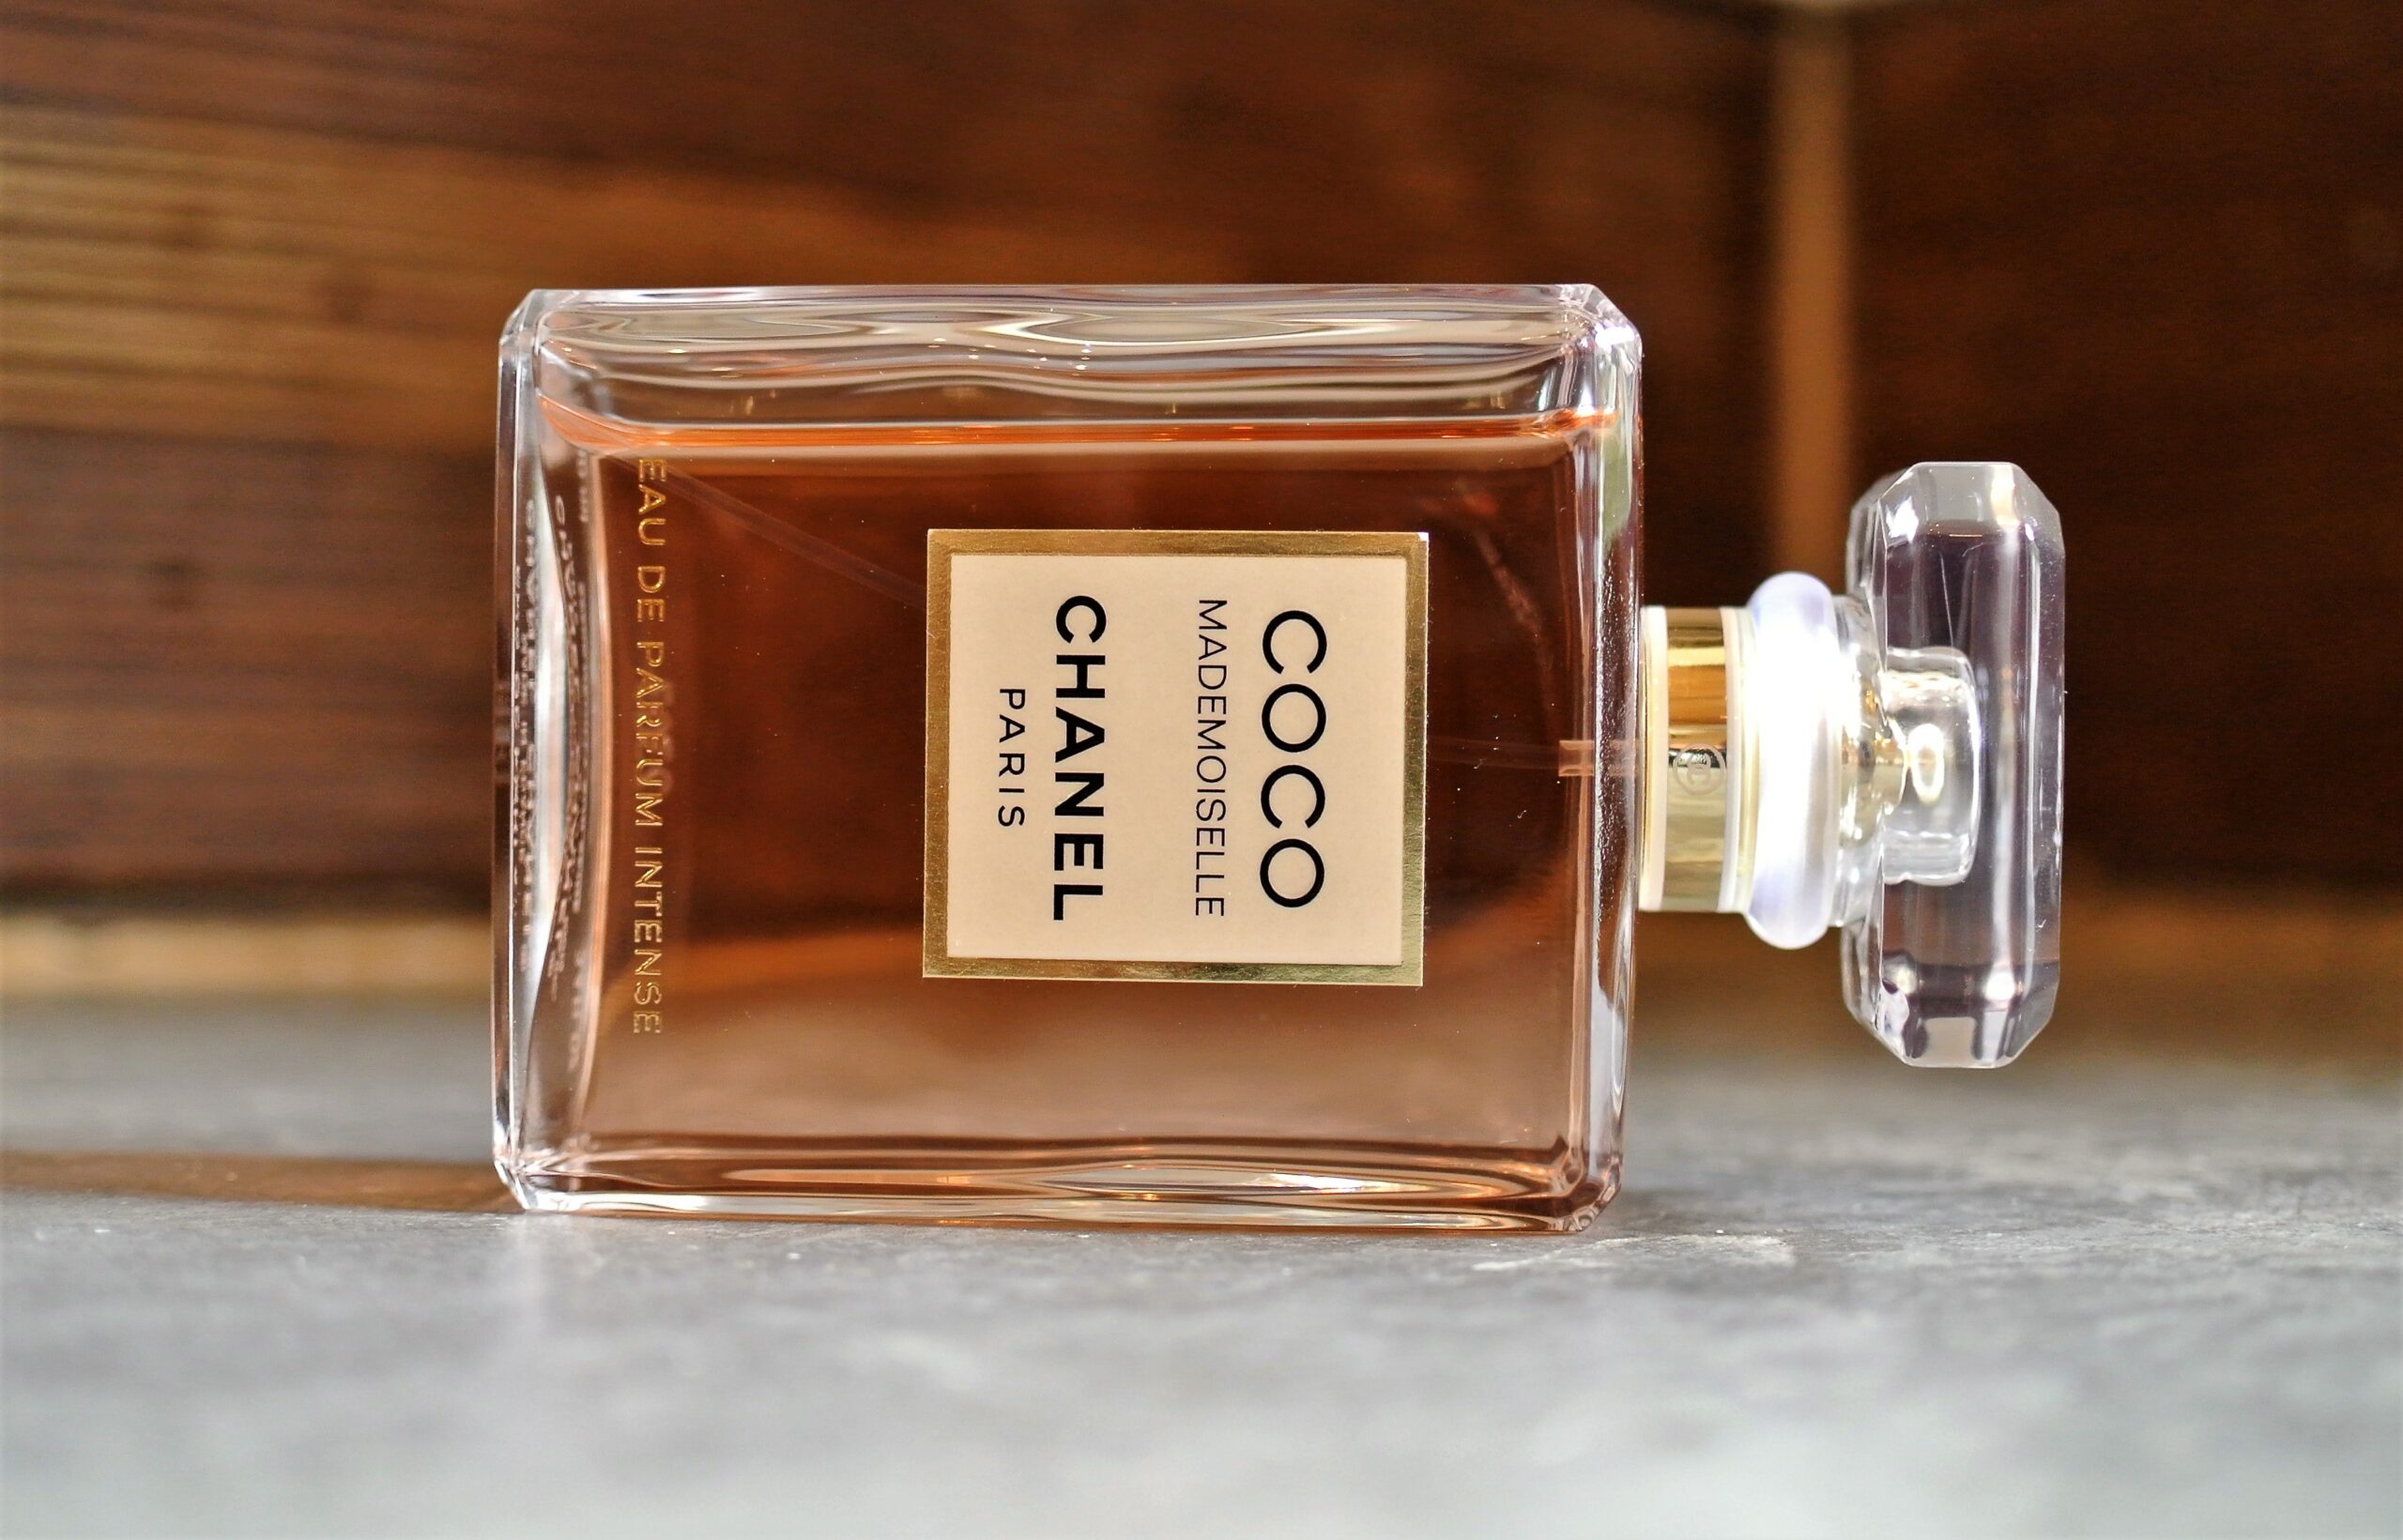 What does Coco Mademoiselle intense smell like?